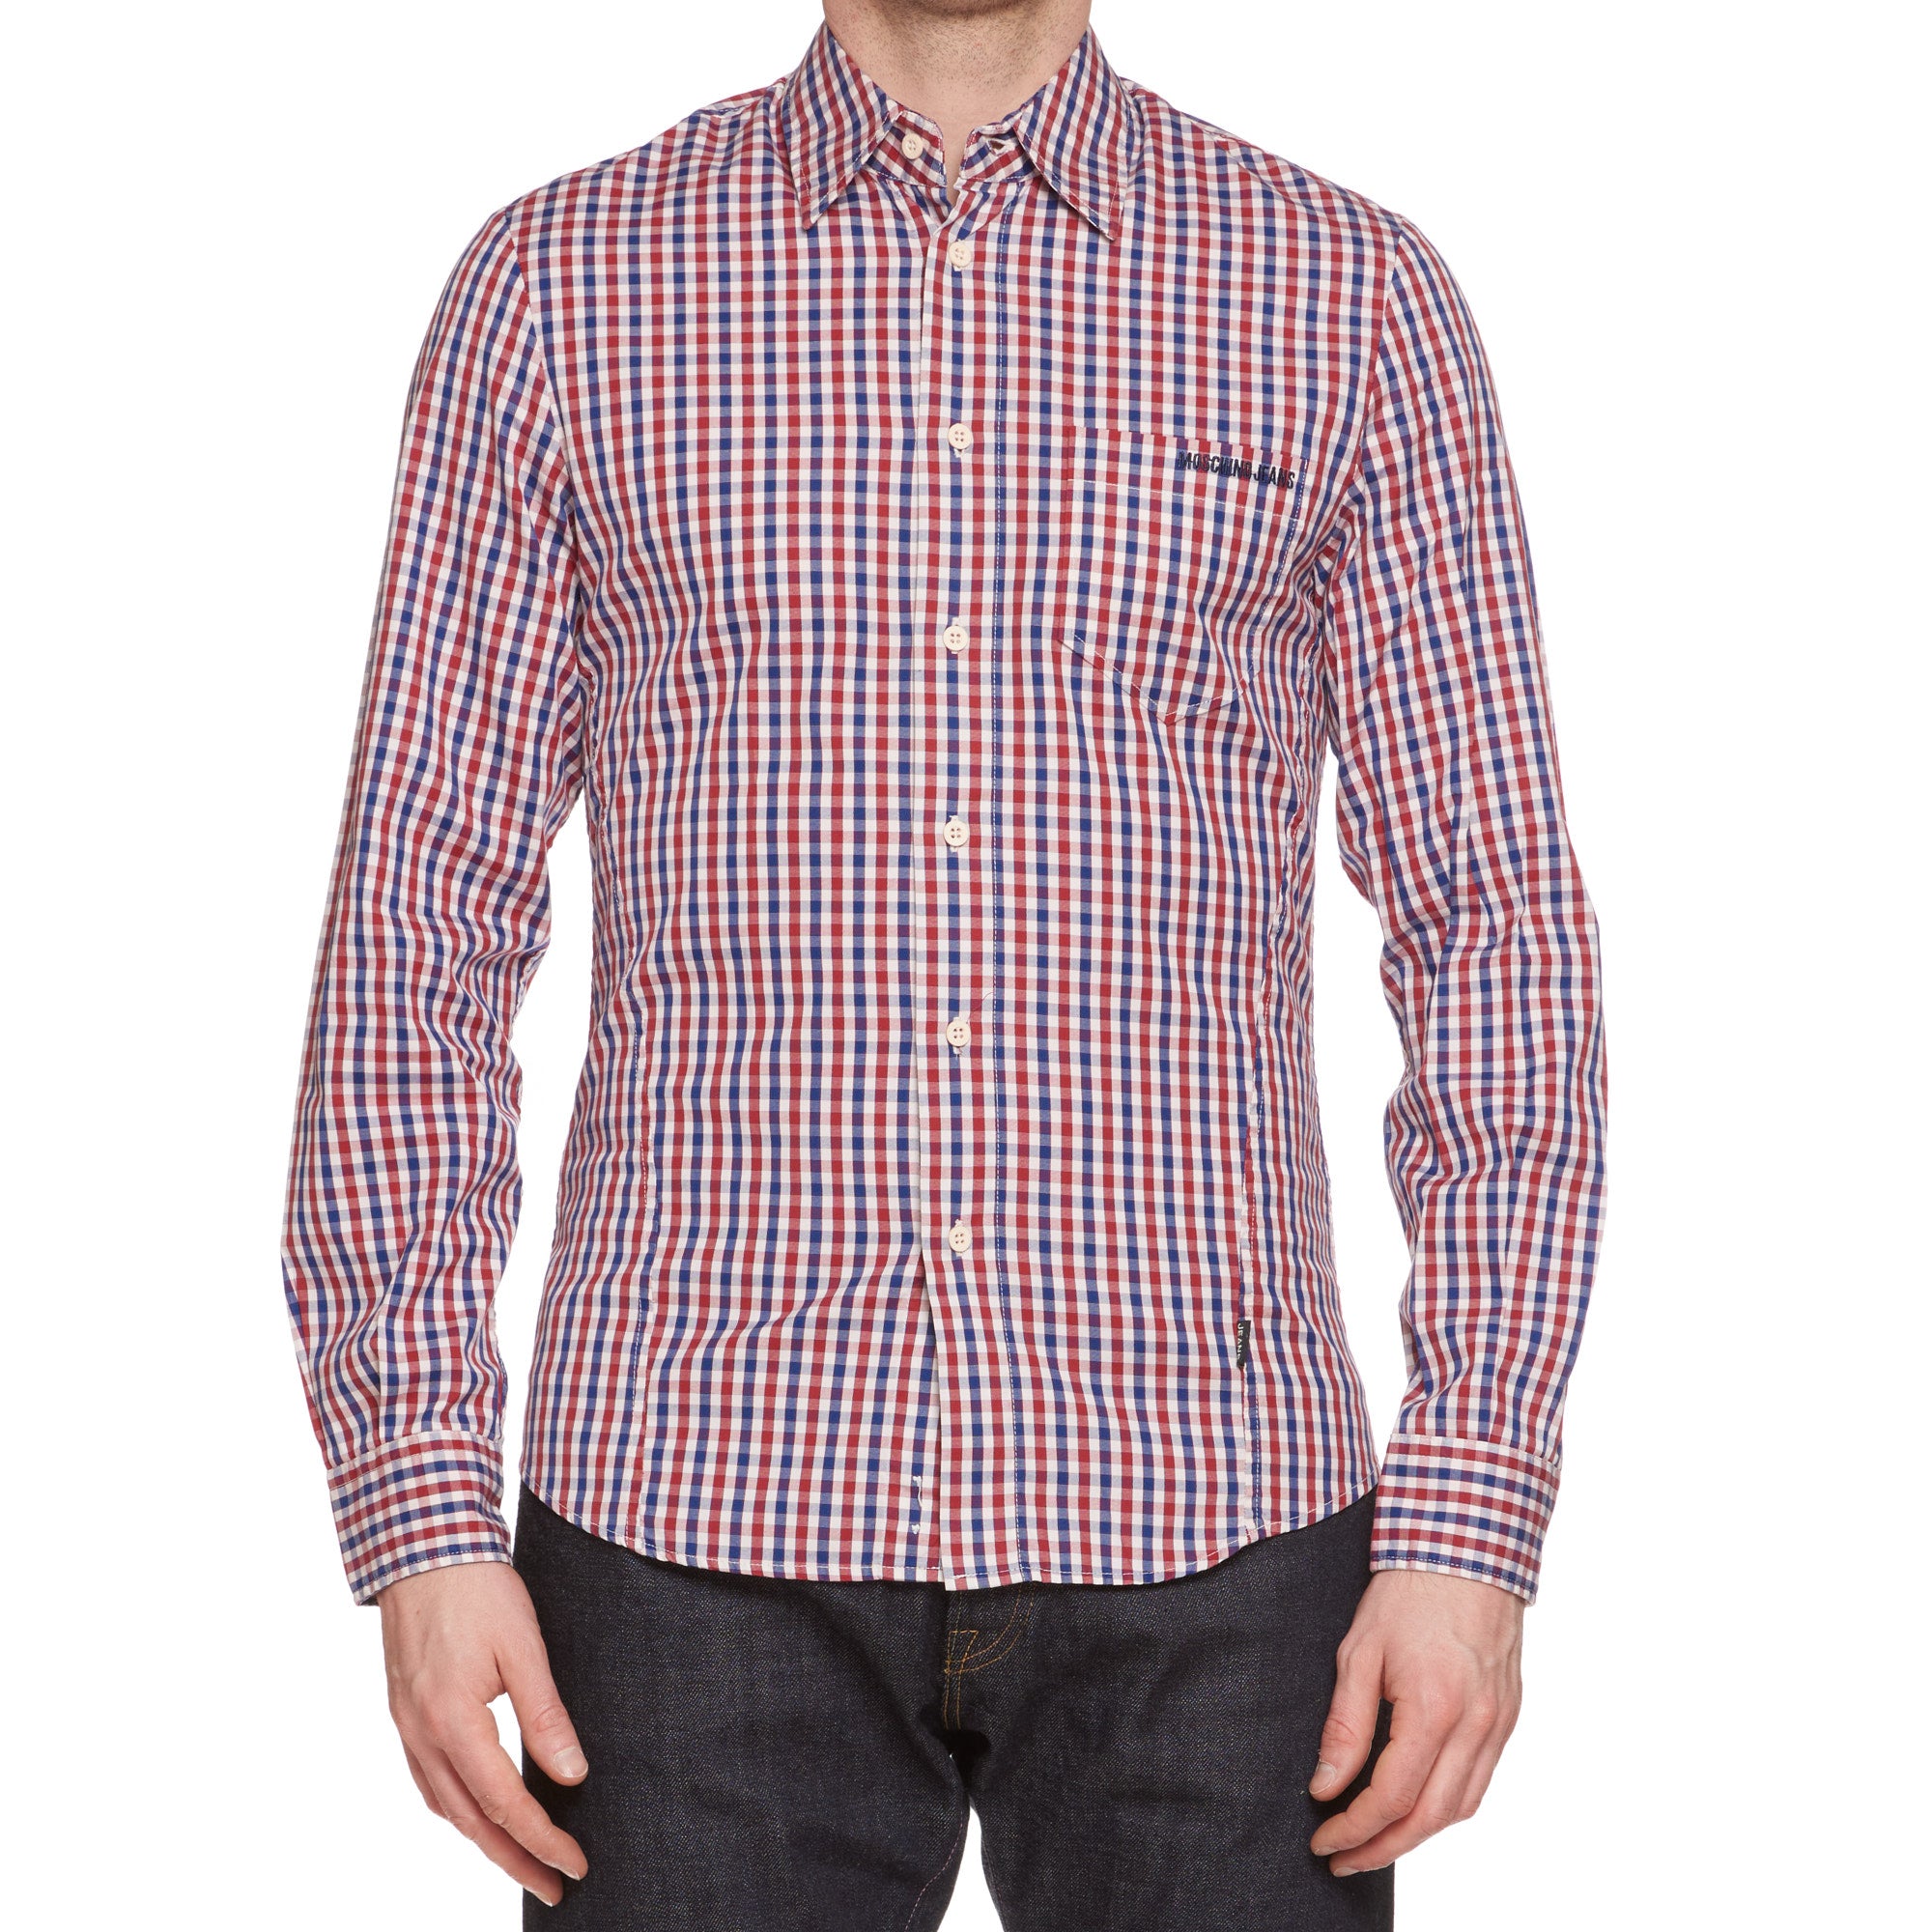 MOSCHINO Jeans Red-Blue Gingham Check Cotton Slim Fit Casual Shirt US M MOSCHINO